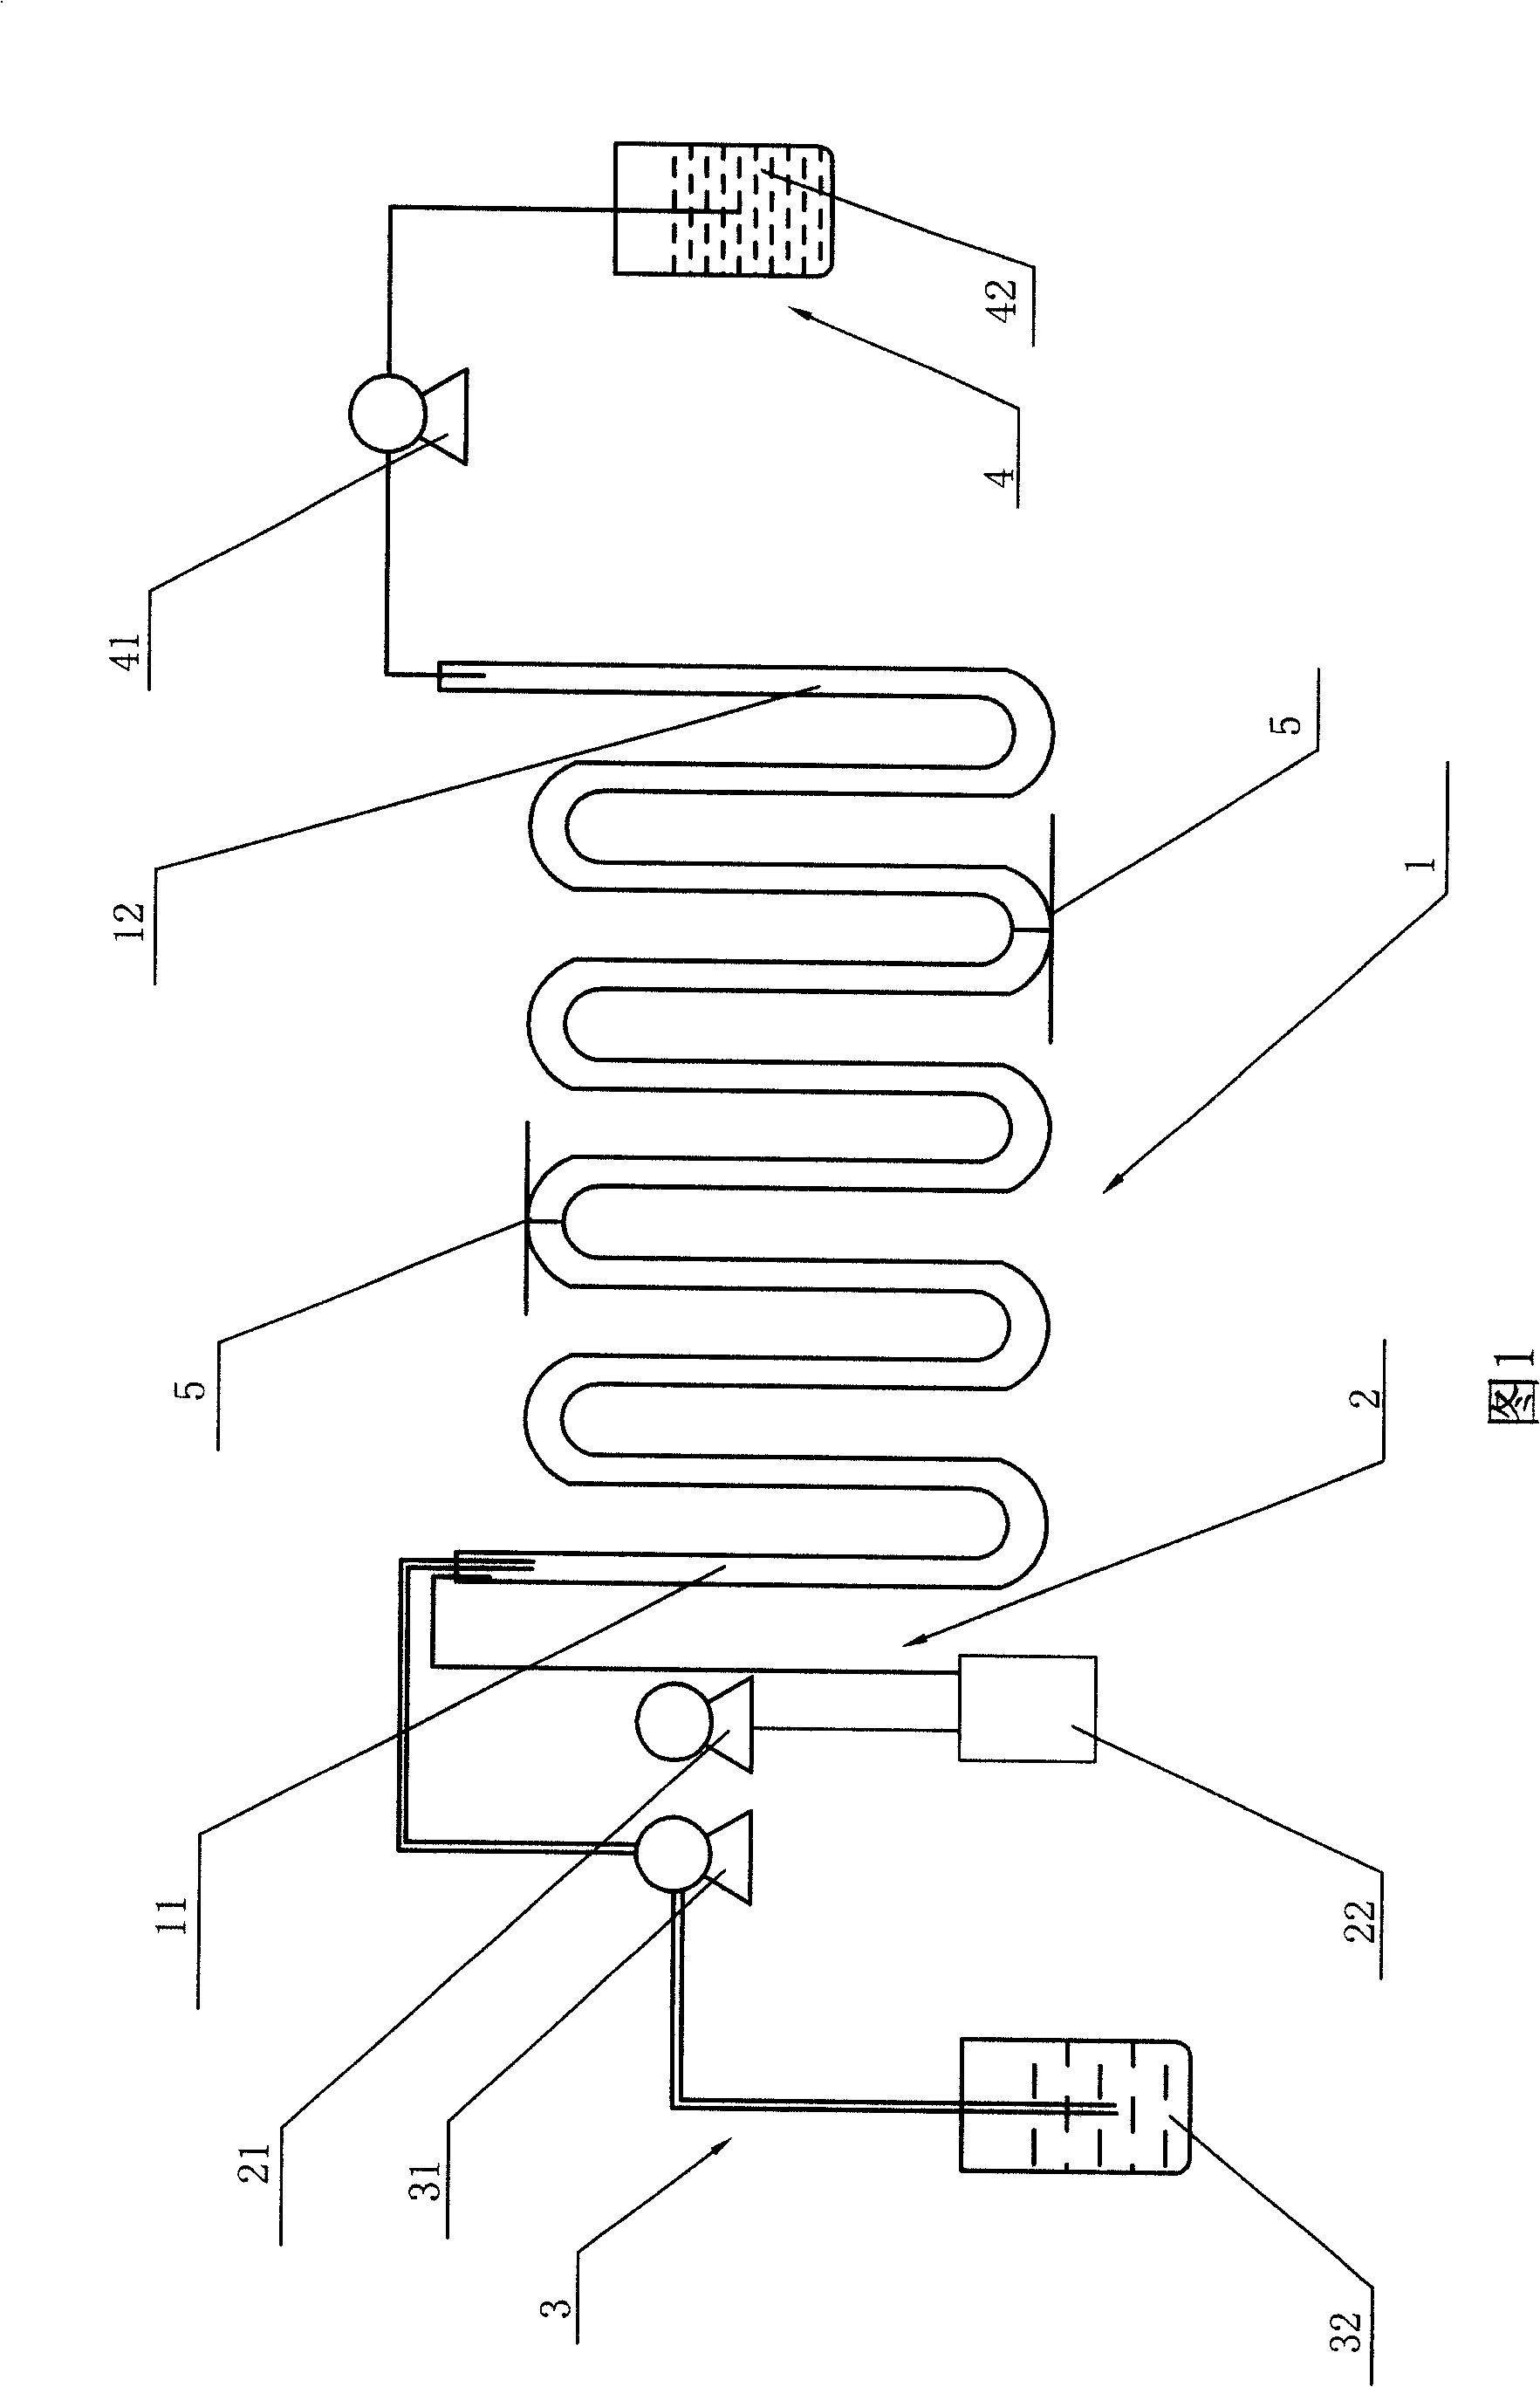 Device and method for large scale culturing Haemotococcum pluvies and converting astaxanthin